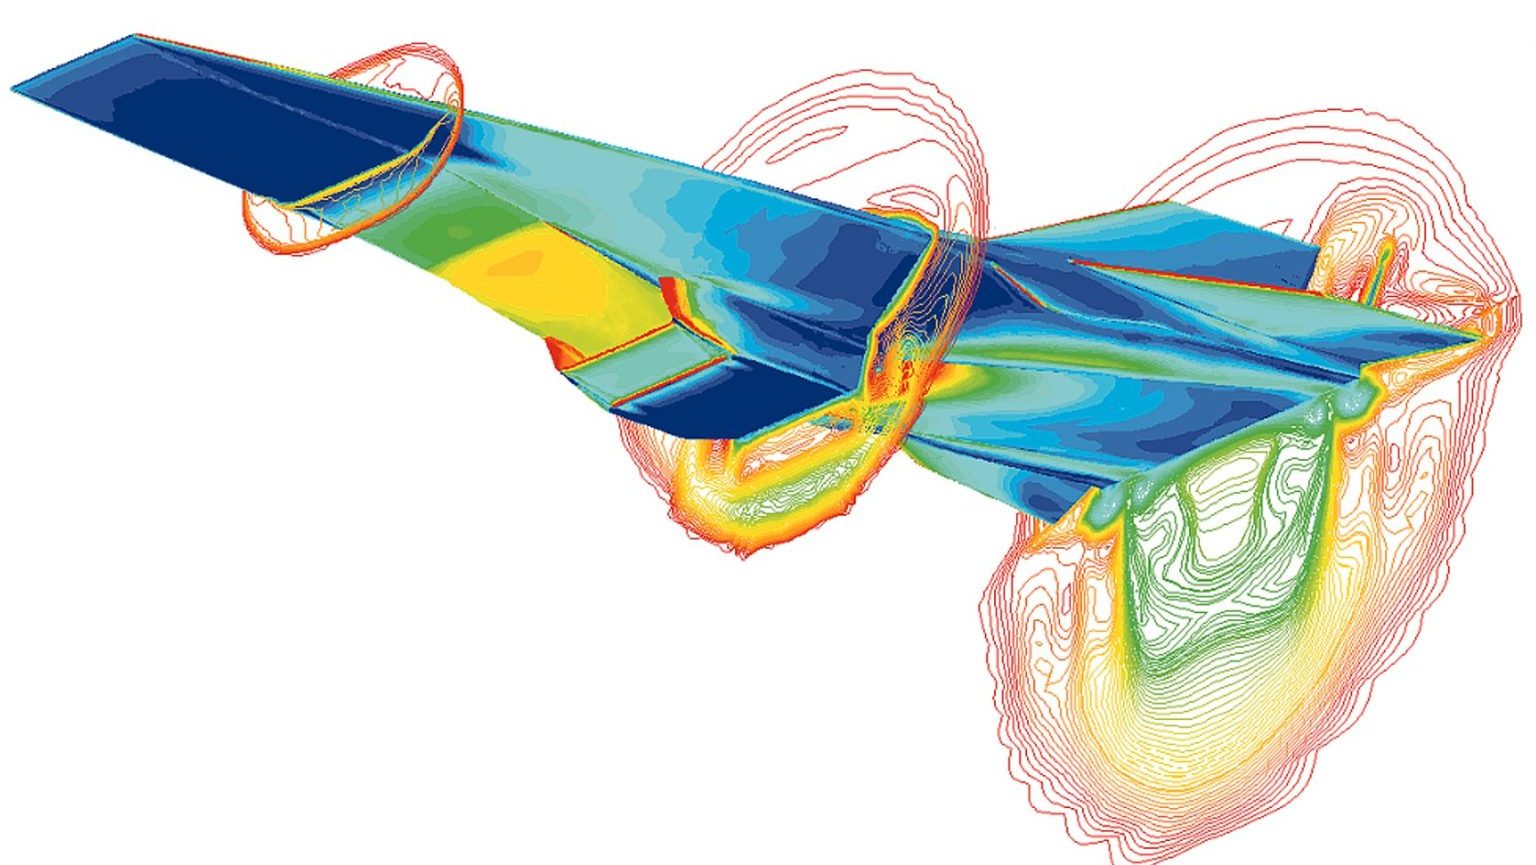 A computer-generated image shows the airflow patterns around a streamlined aircraft, highlighted in various colors to depict different airflow intensities.